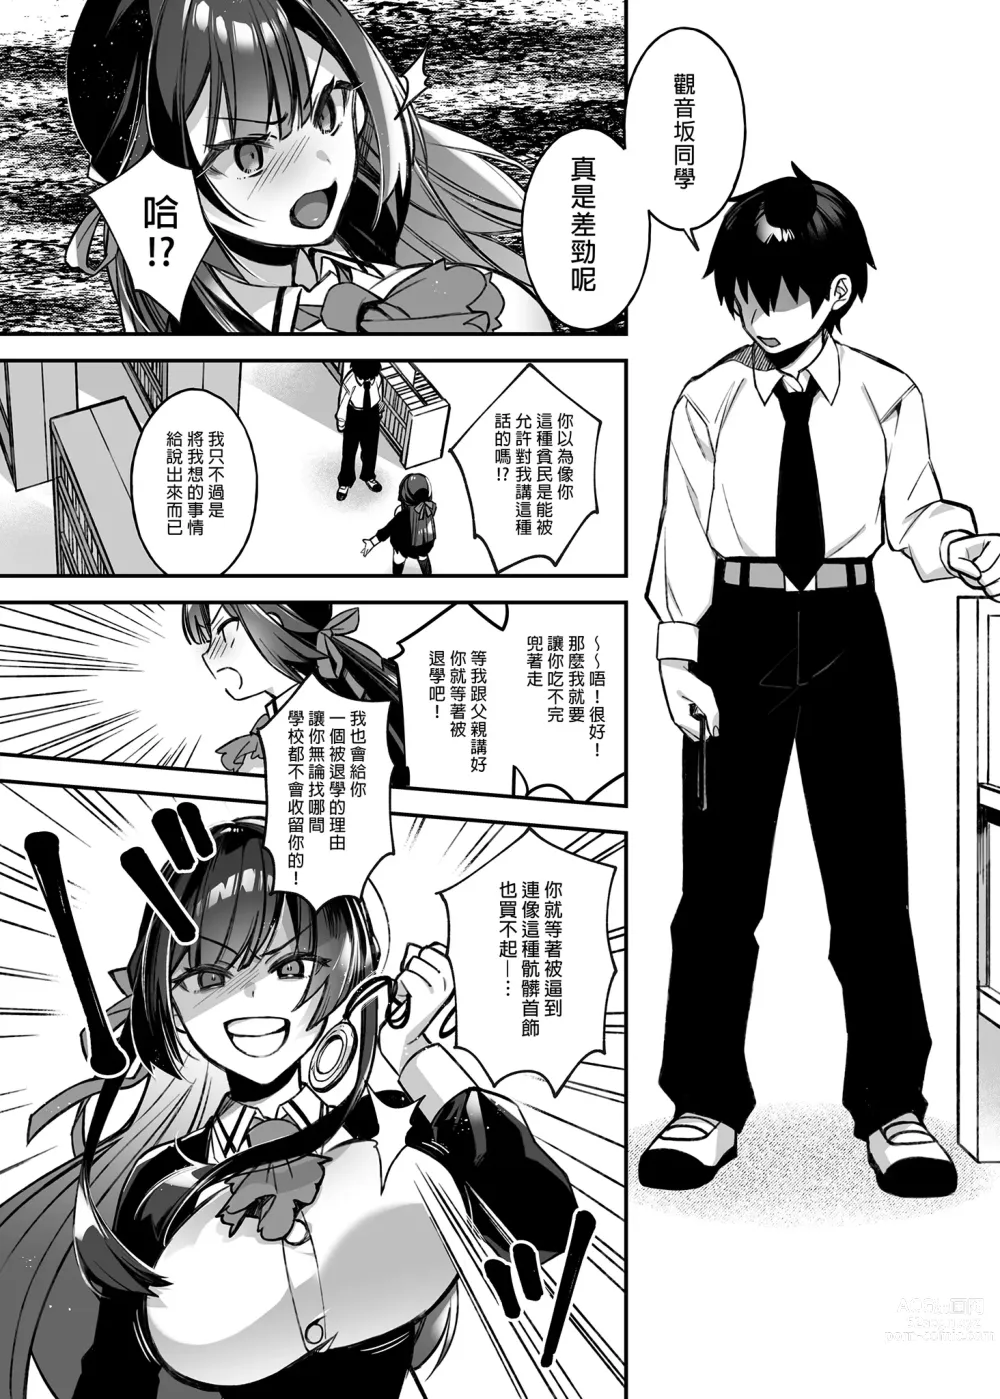 Page 16 of doujinshi Uncontrollable mindcontrol